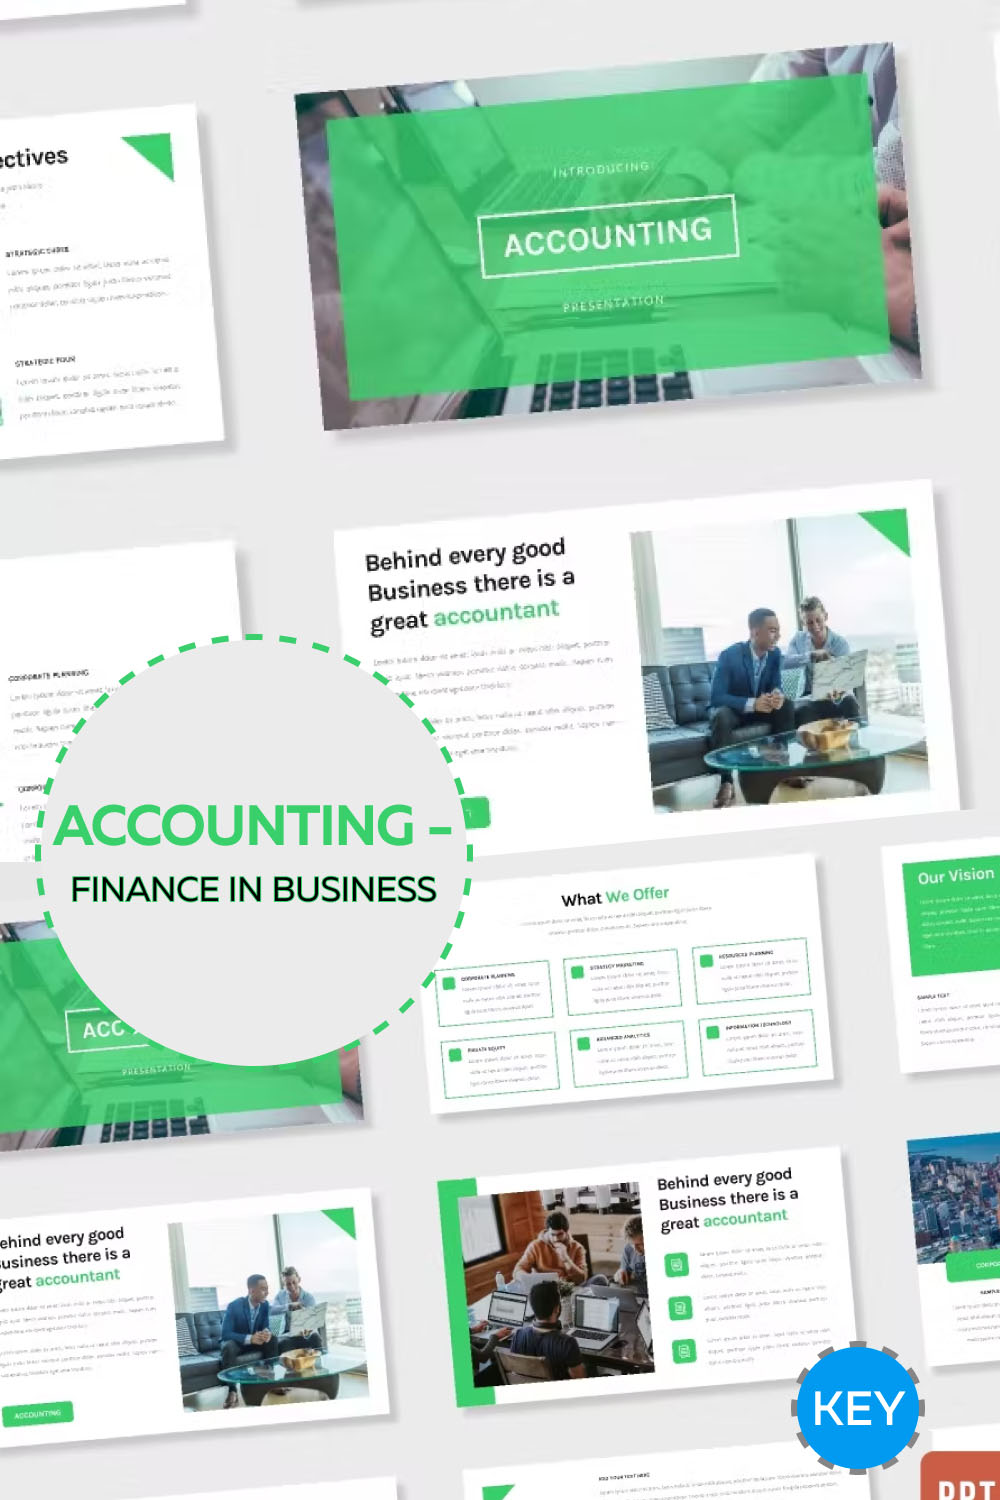 Accounting finance in business keynote of pinterest.